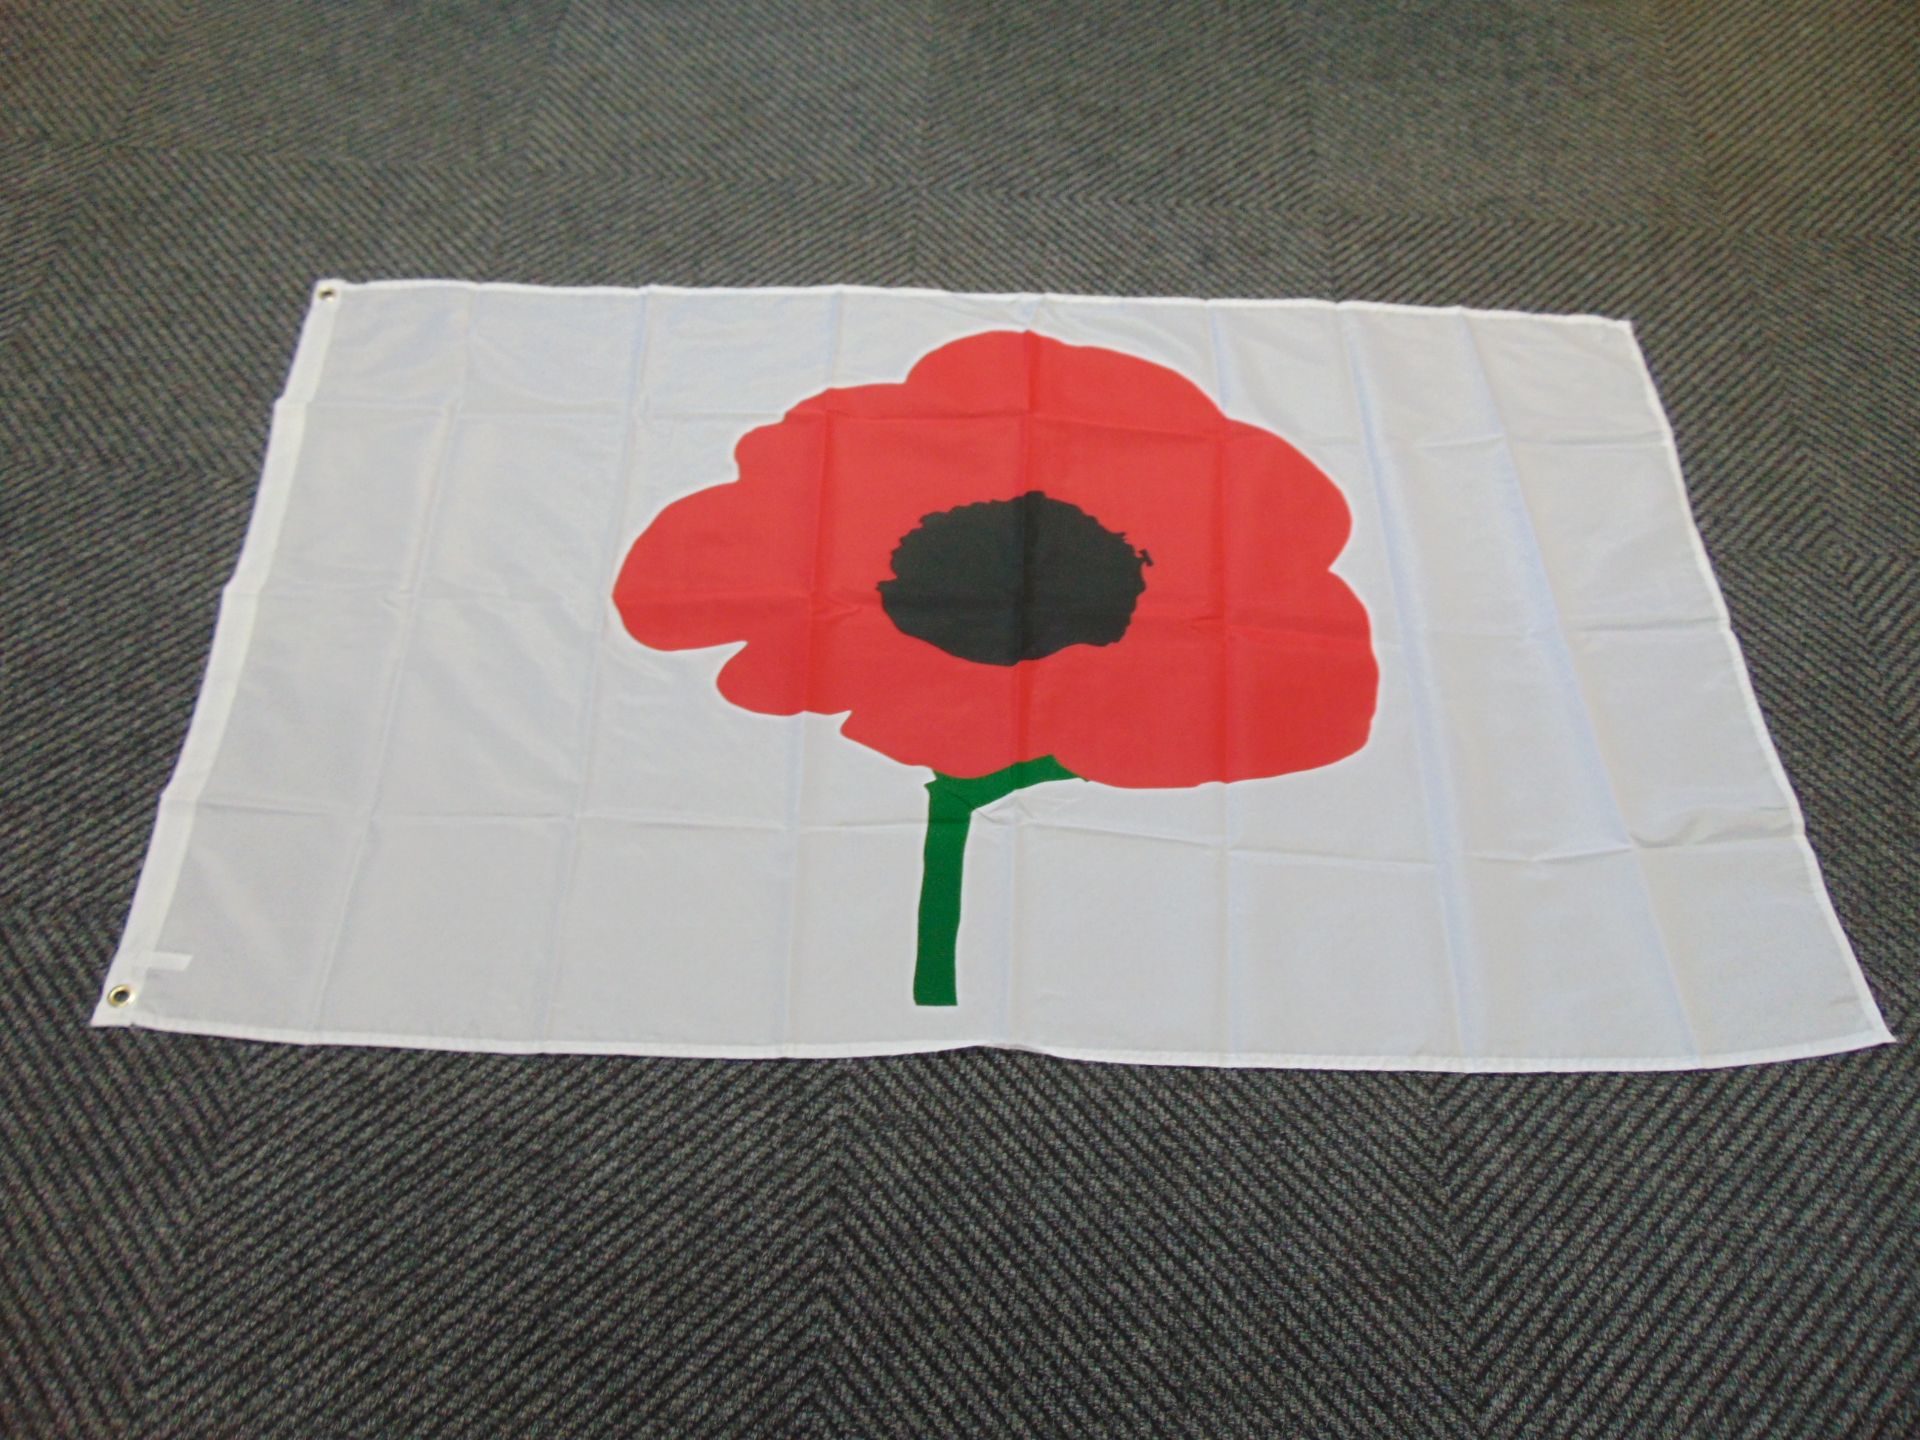 Poppy Flag - 5ft x 3ft with Metal Eyelets.